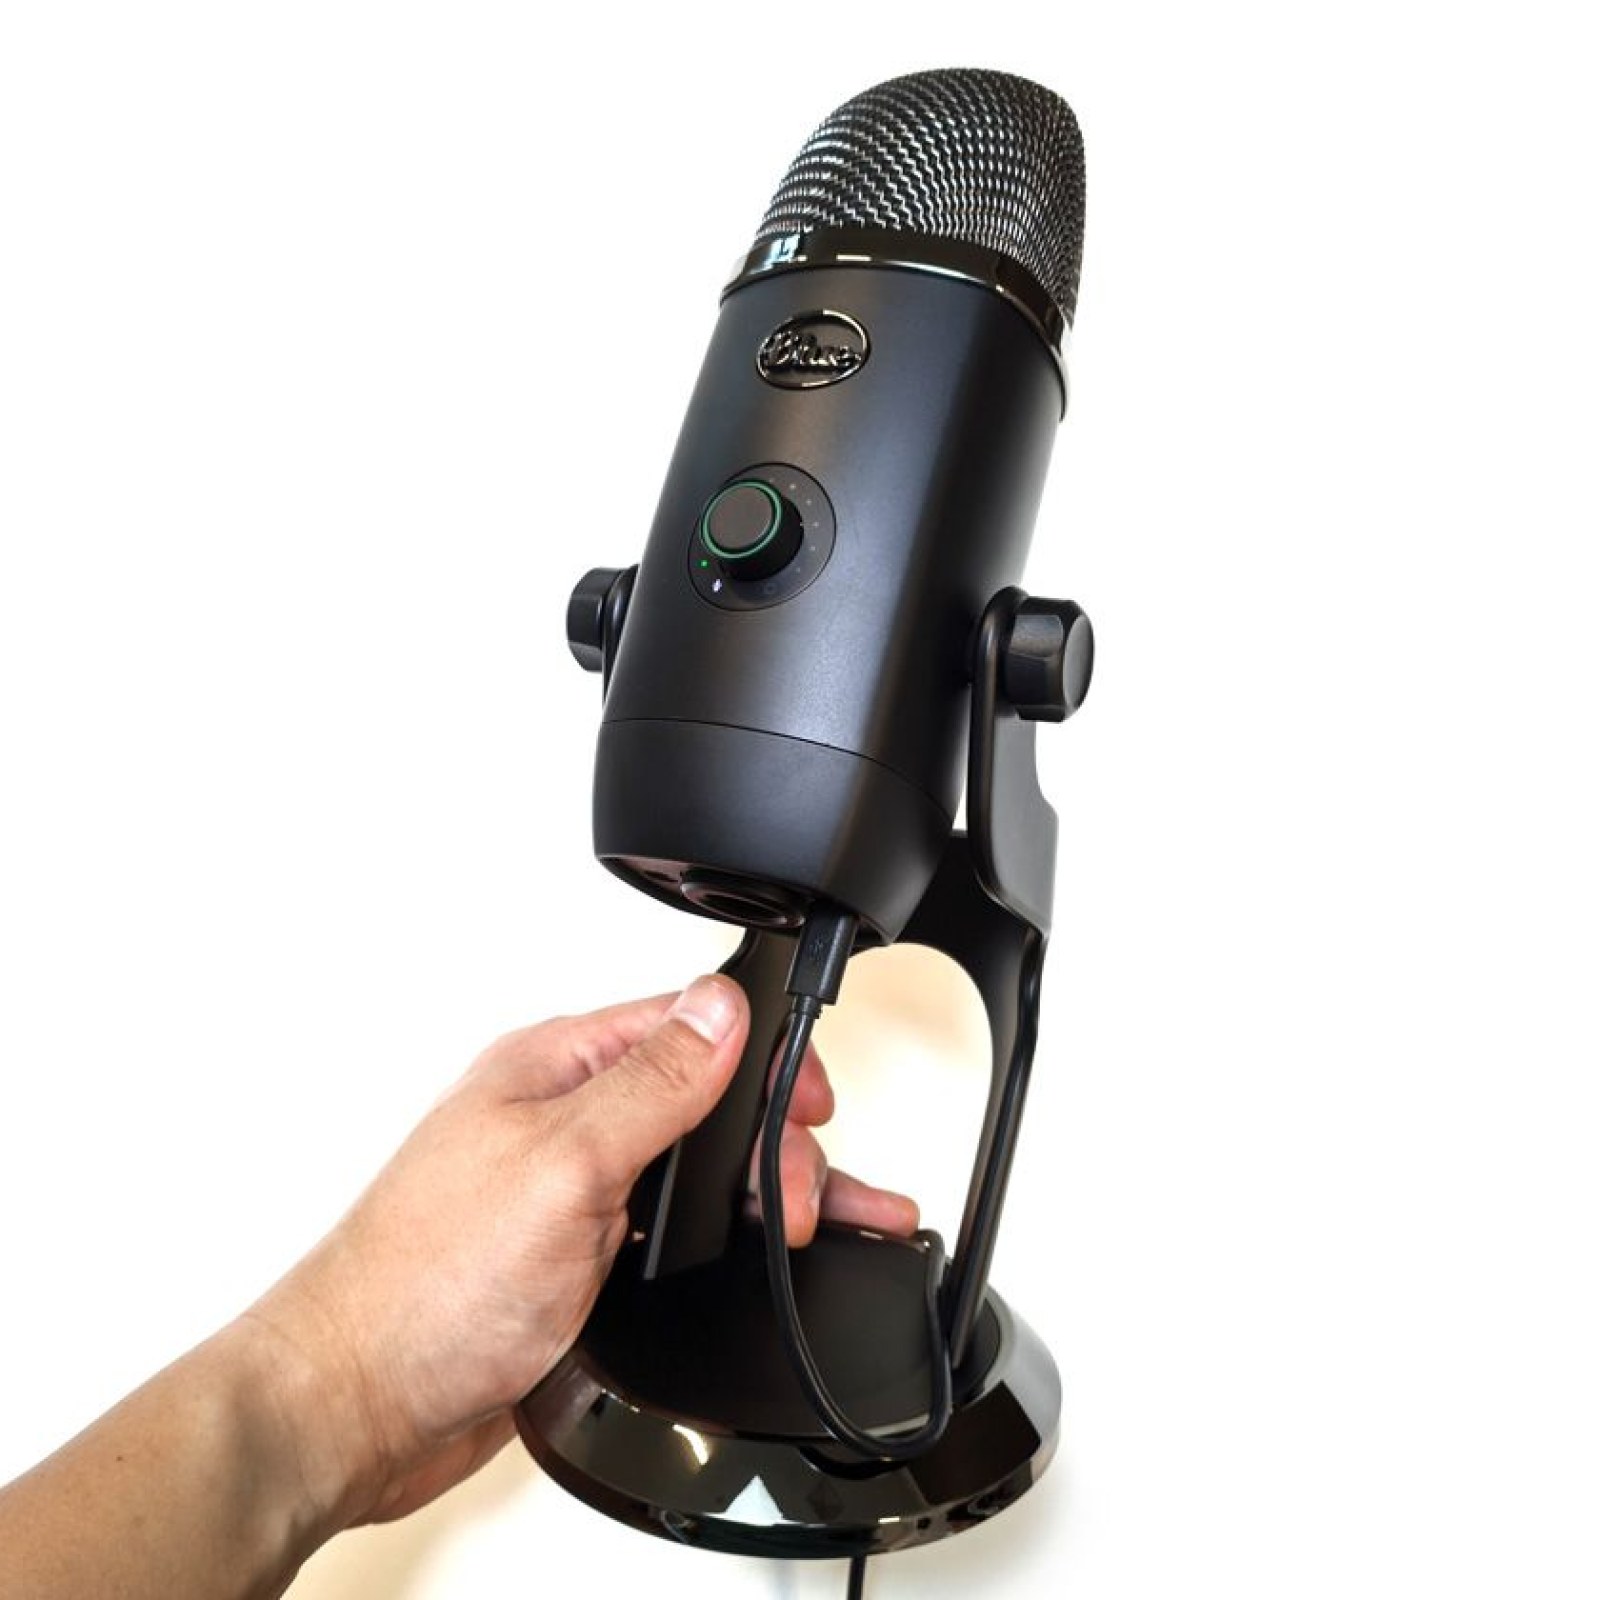 Blue Yeti X (Hands on) Review: All the Mic You Need to Work from